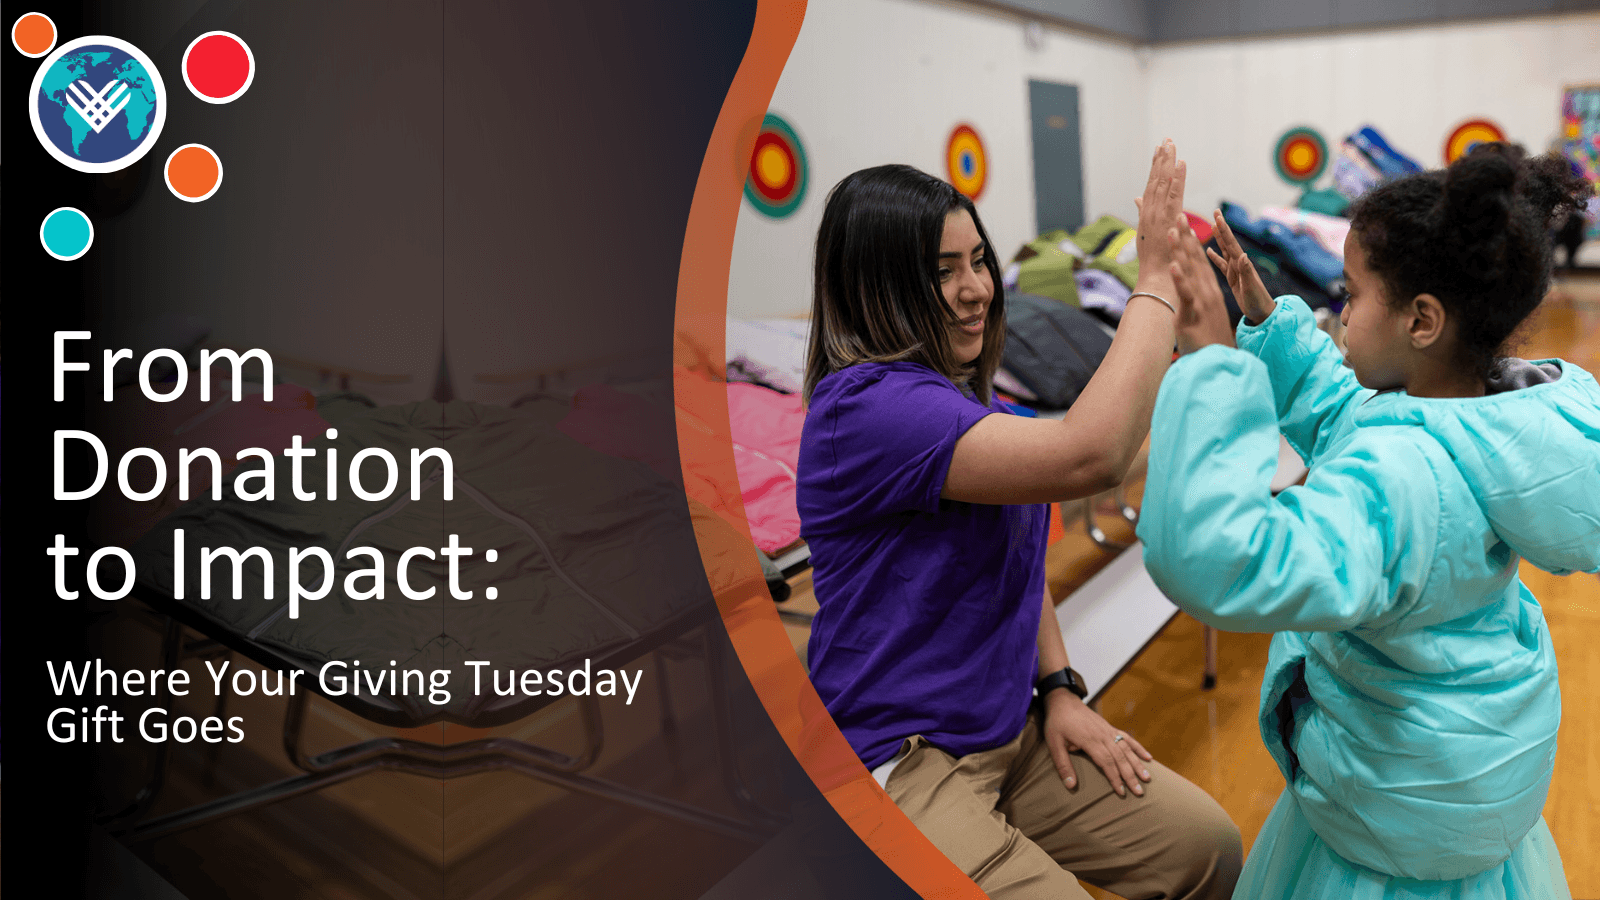 From Donation to Impact: Where Your Giving Tuesday Gift Goes